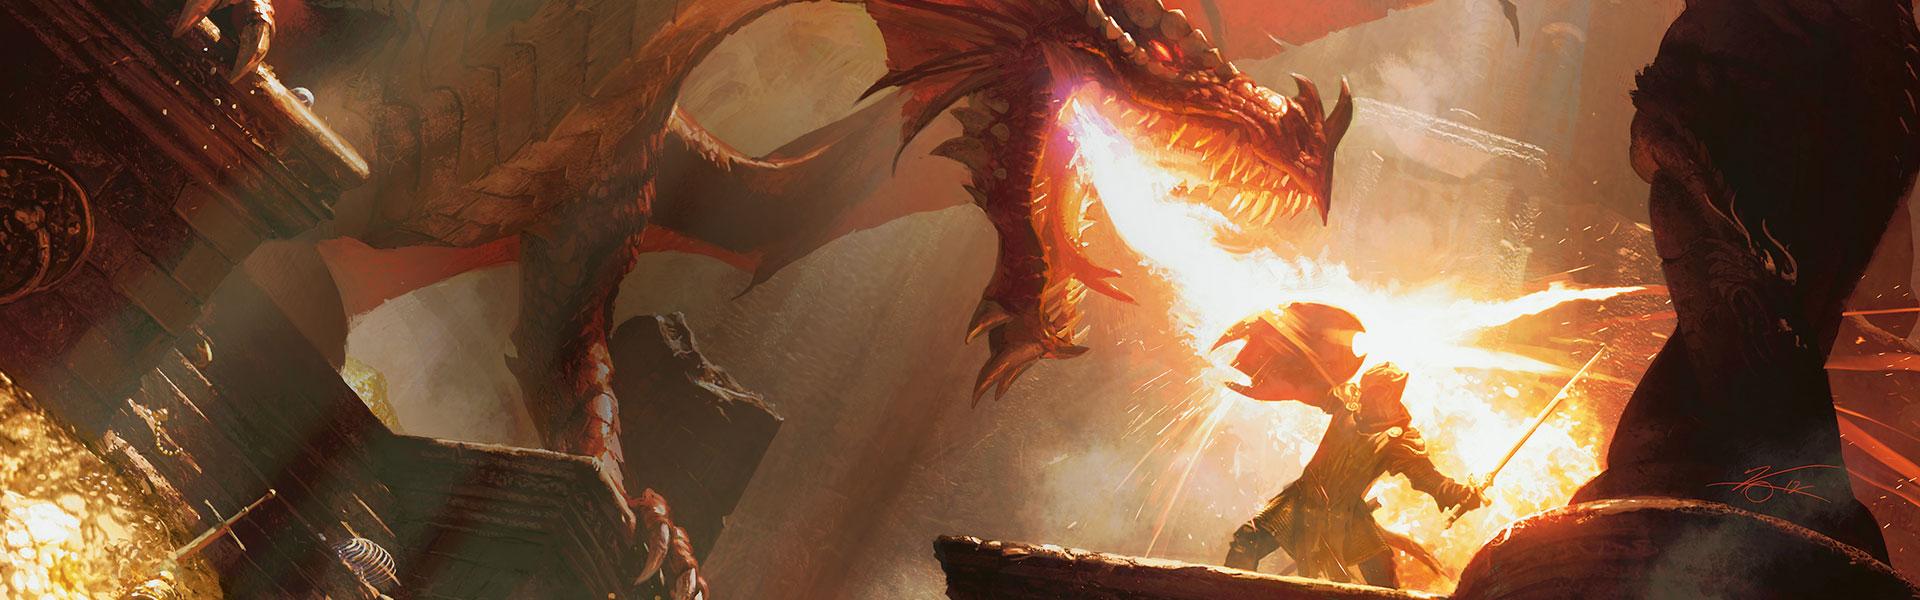 How Dungeons & Dragons Can Make You a Better Leader